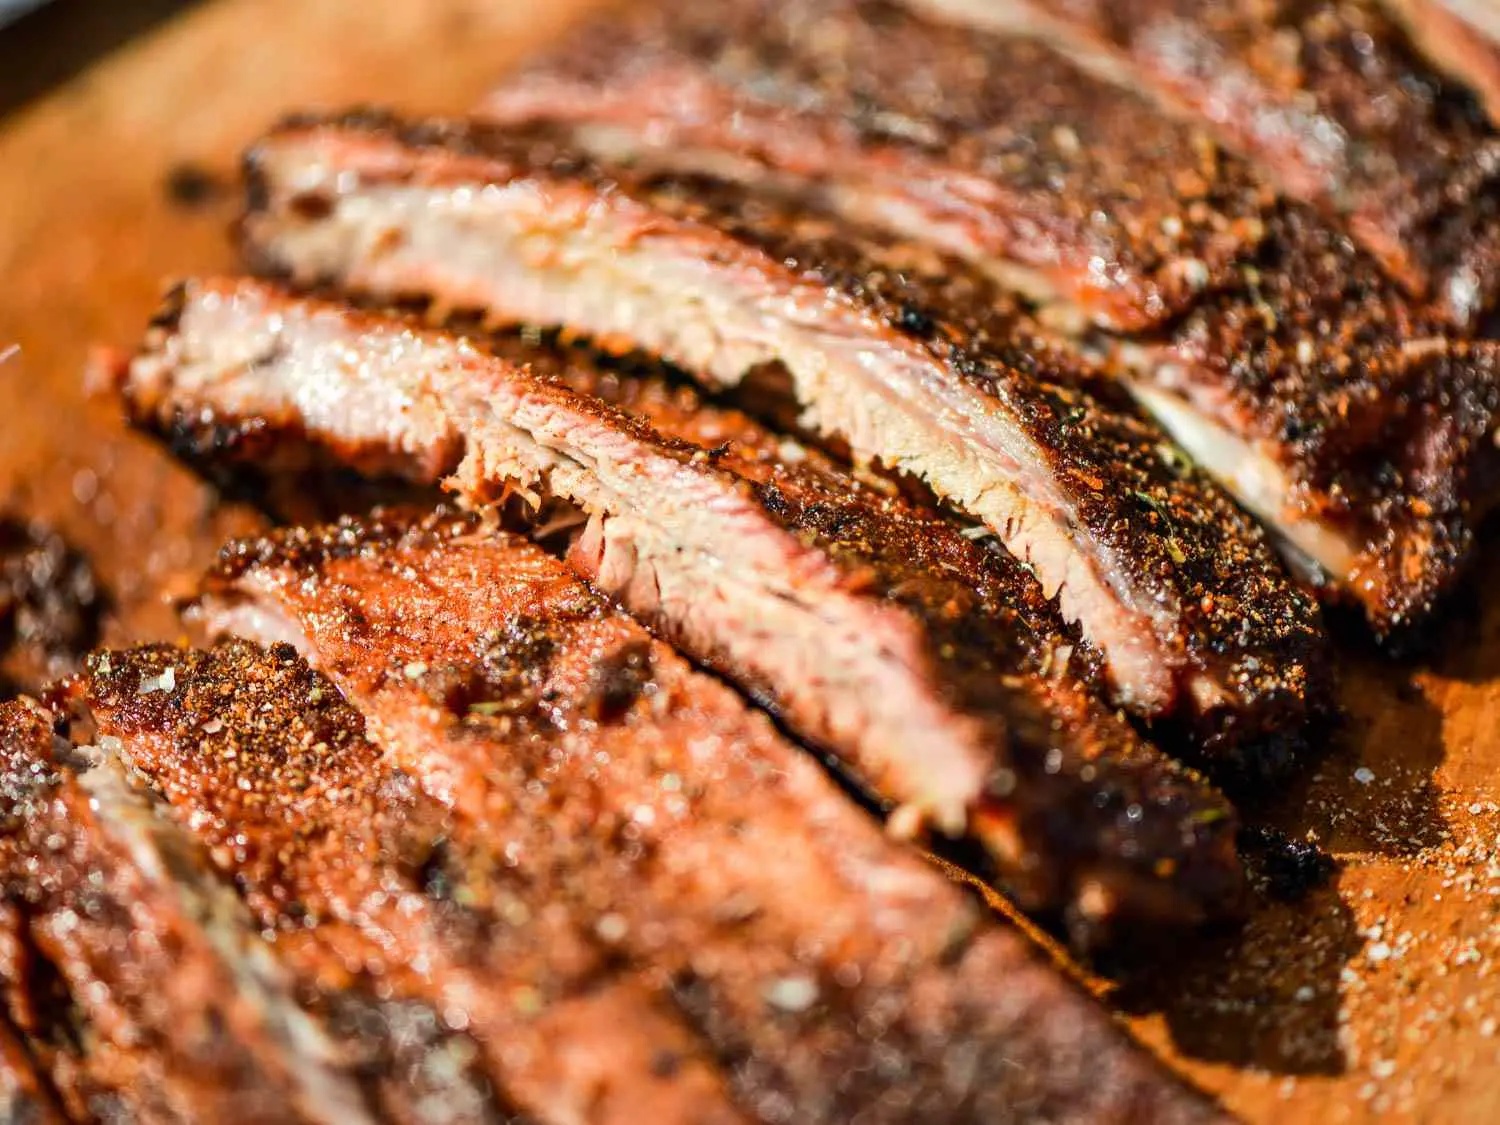 dry smoked ribs - What is the difference between wet and dry ribs